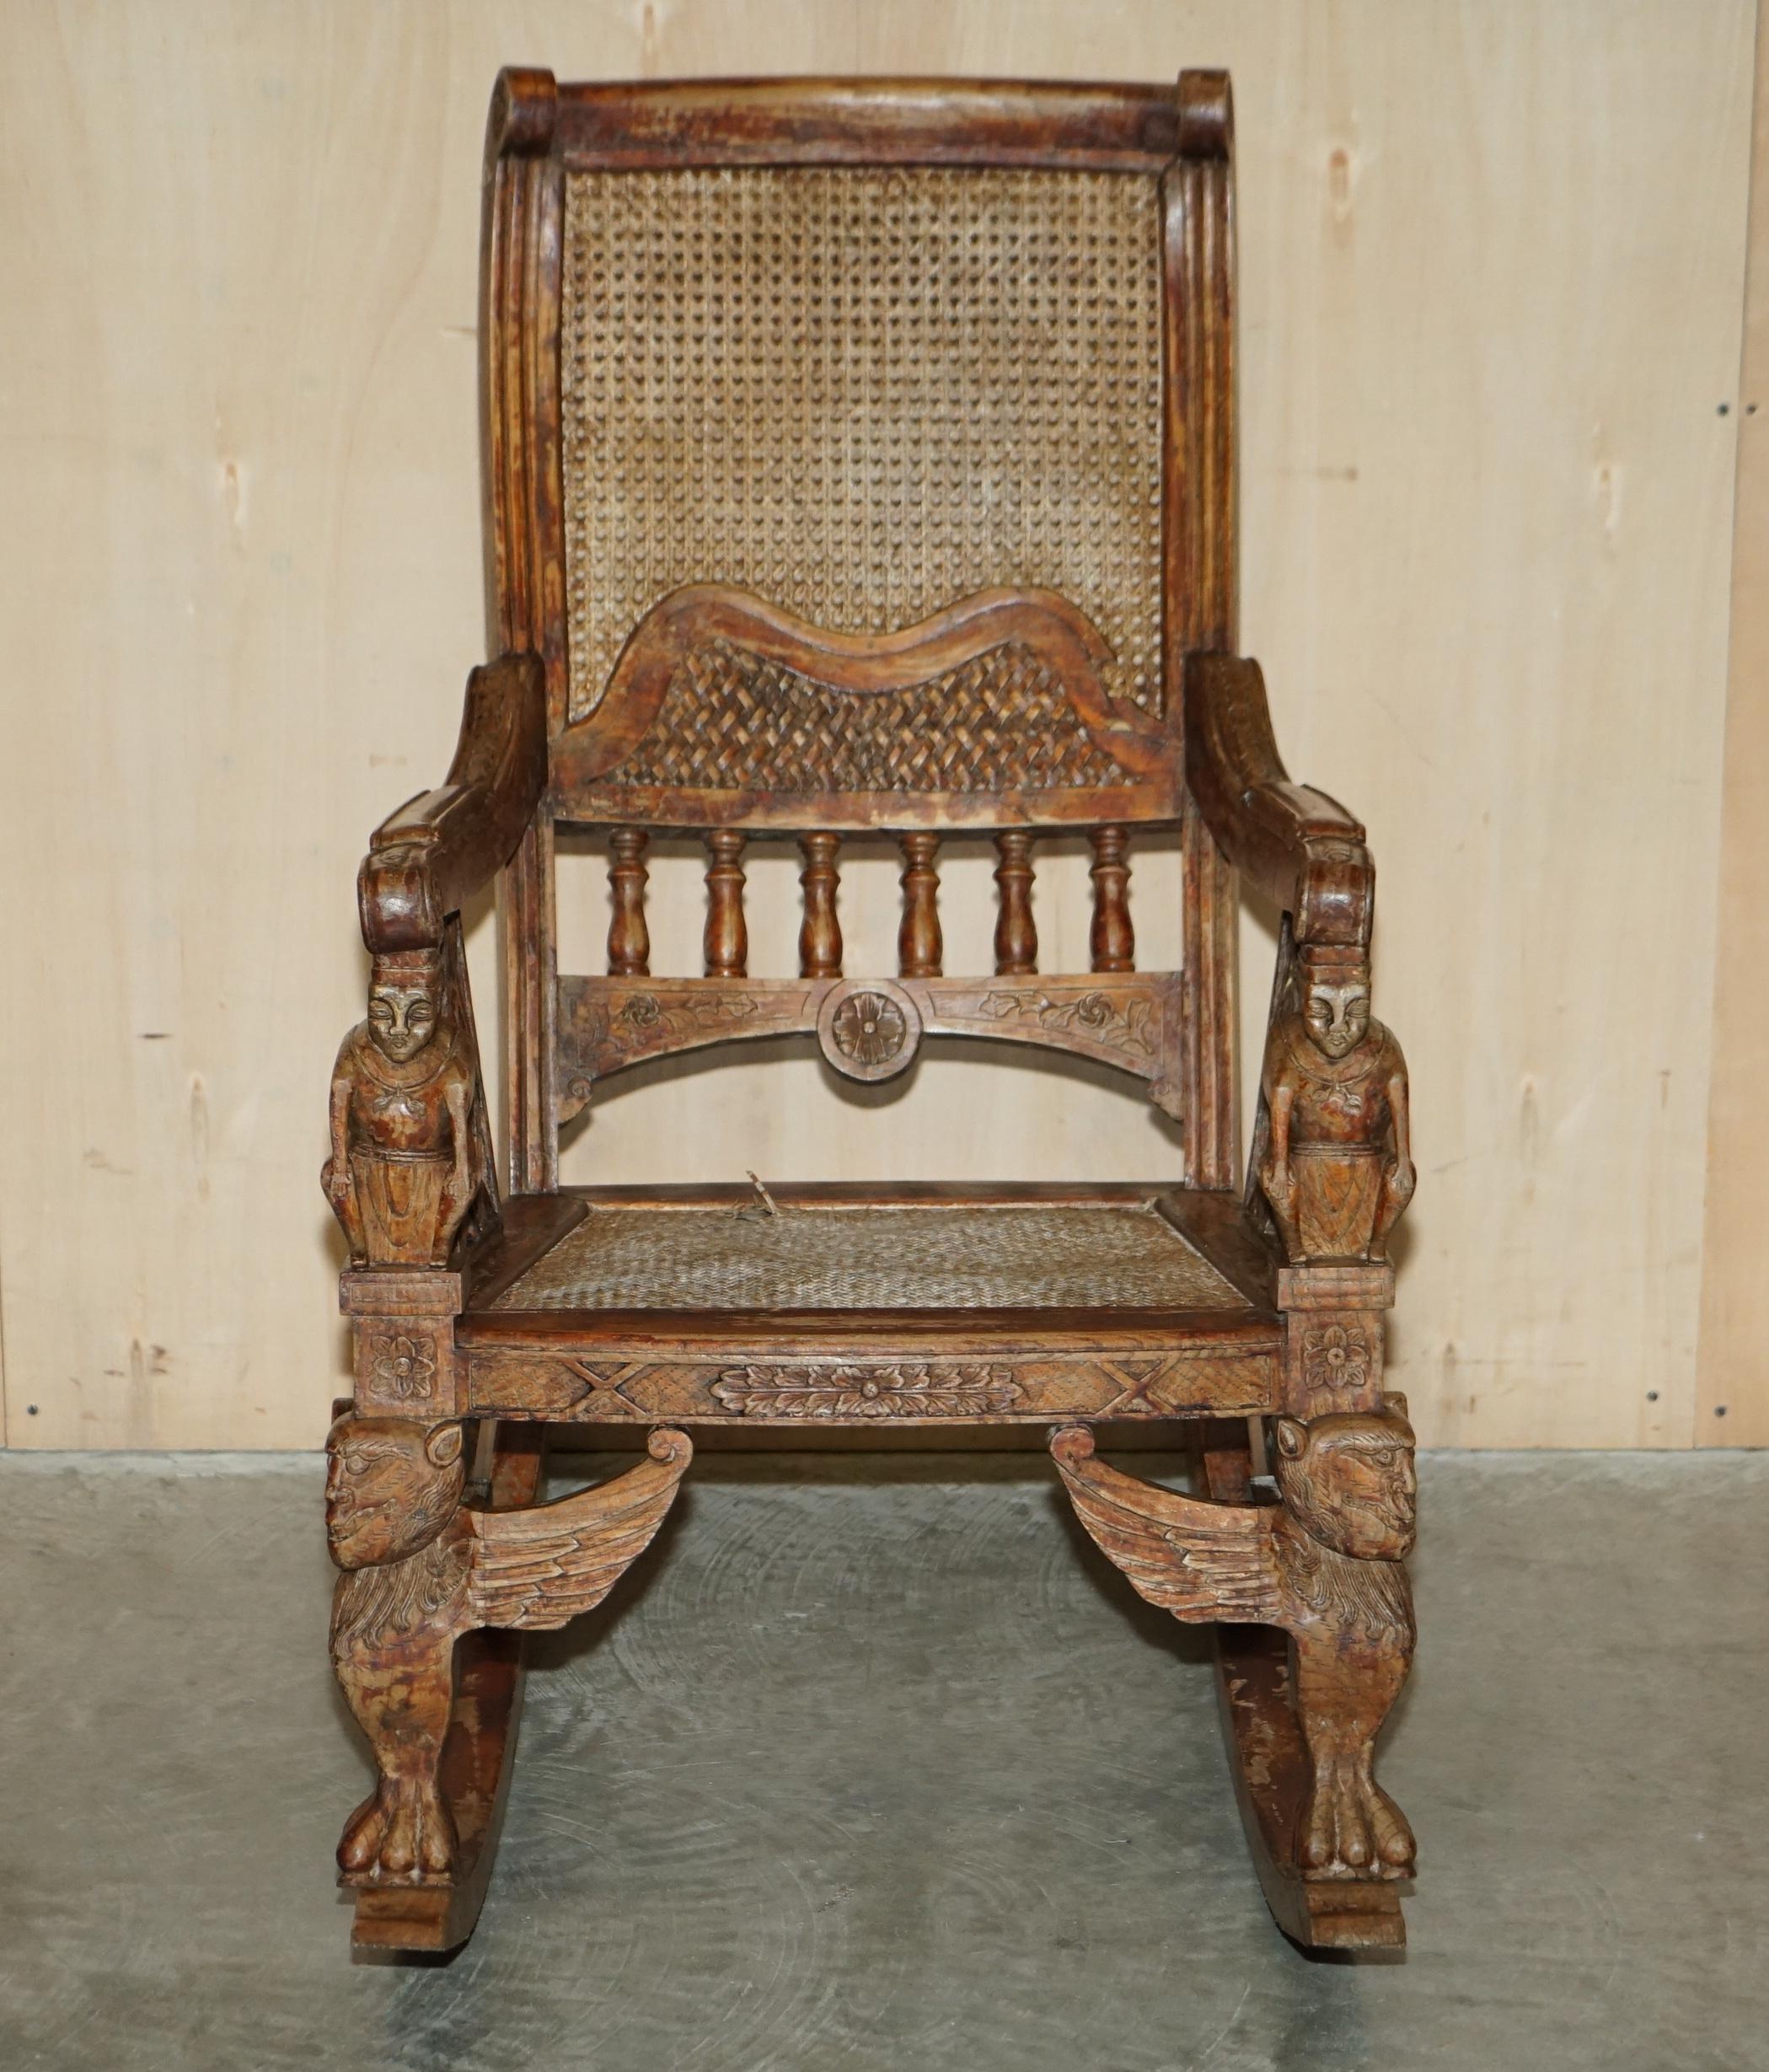 We are delighted to offer for sale this stunning hand carved Tibetan rocking armchair with original patina finish.

A very good looking well made and decorative piece, this is an original patina chair so it has the period distressed finish which